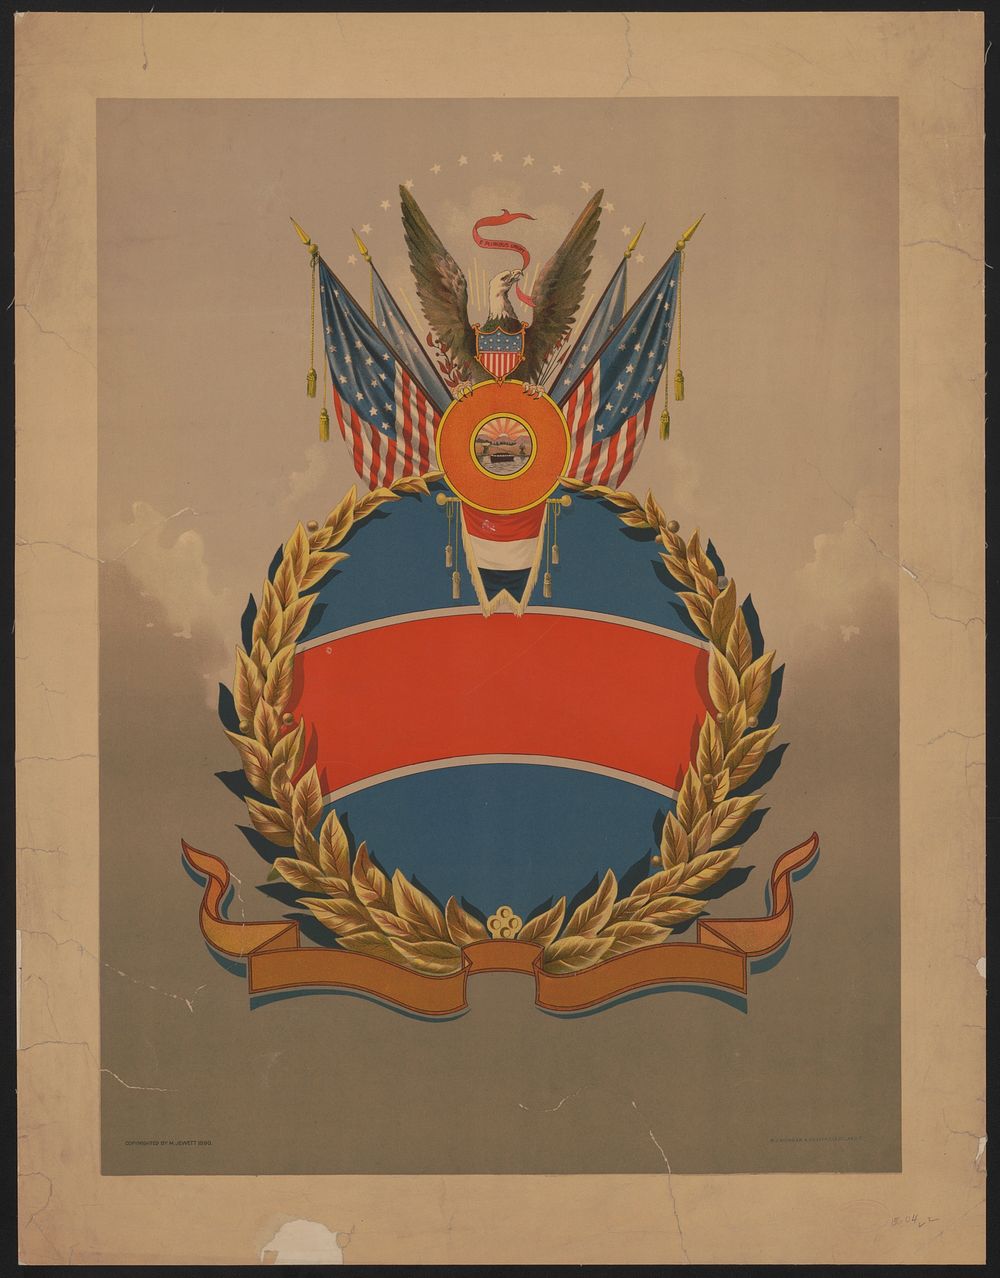 [Blank design for award, with flags, olive banches and eagle]